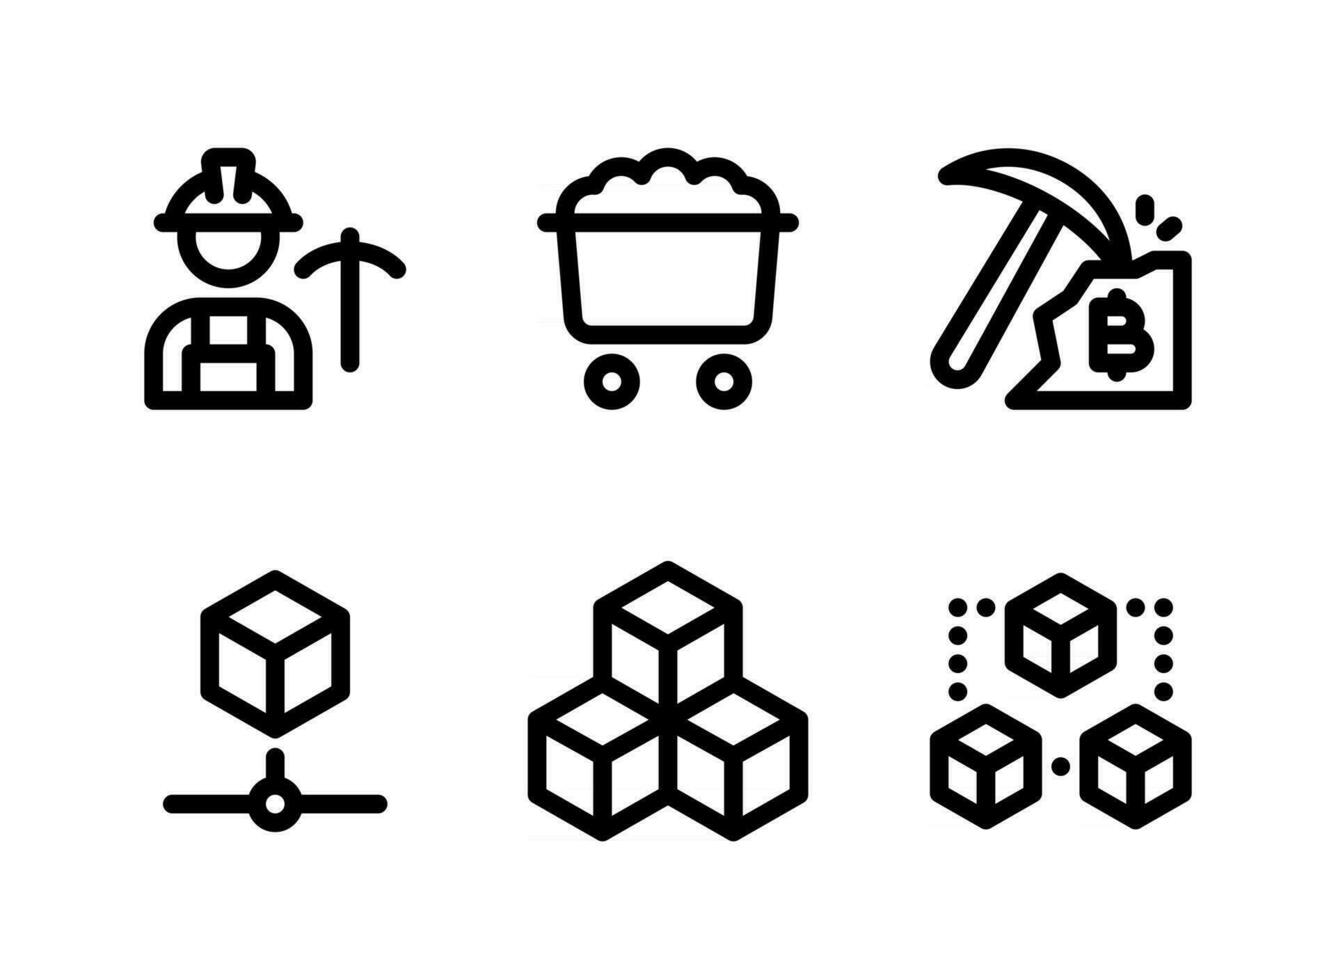 Simple Set of Cryptocurrency Related Vector Line Icons